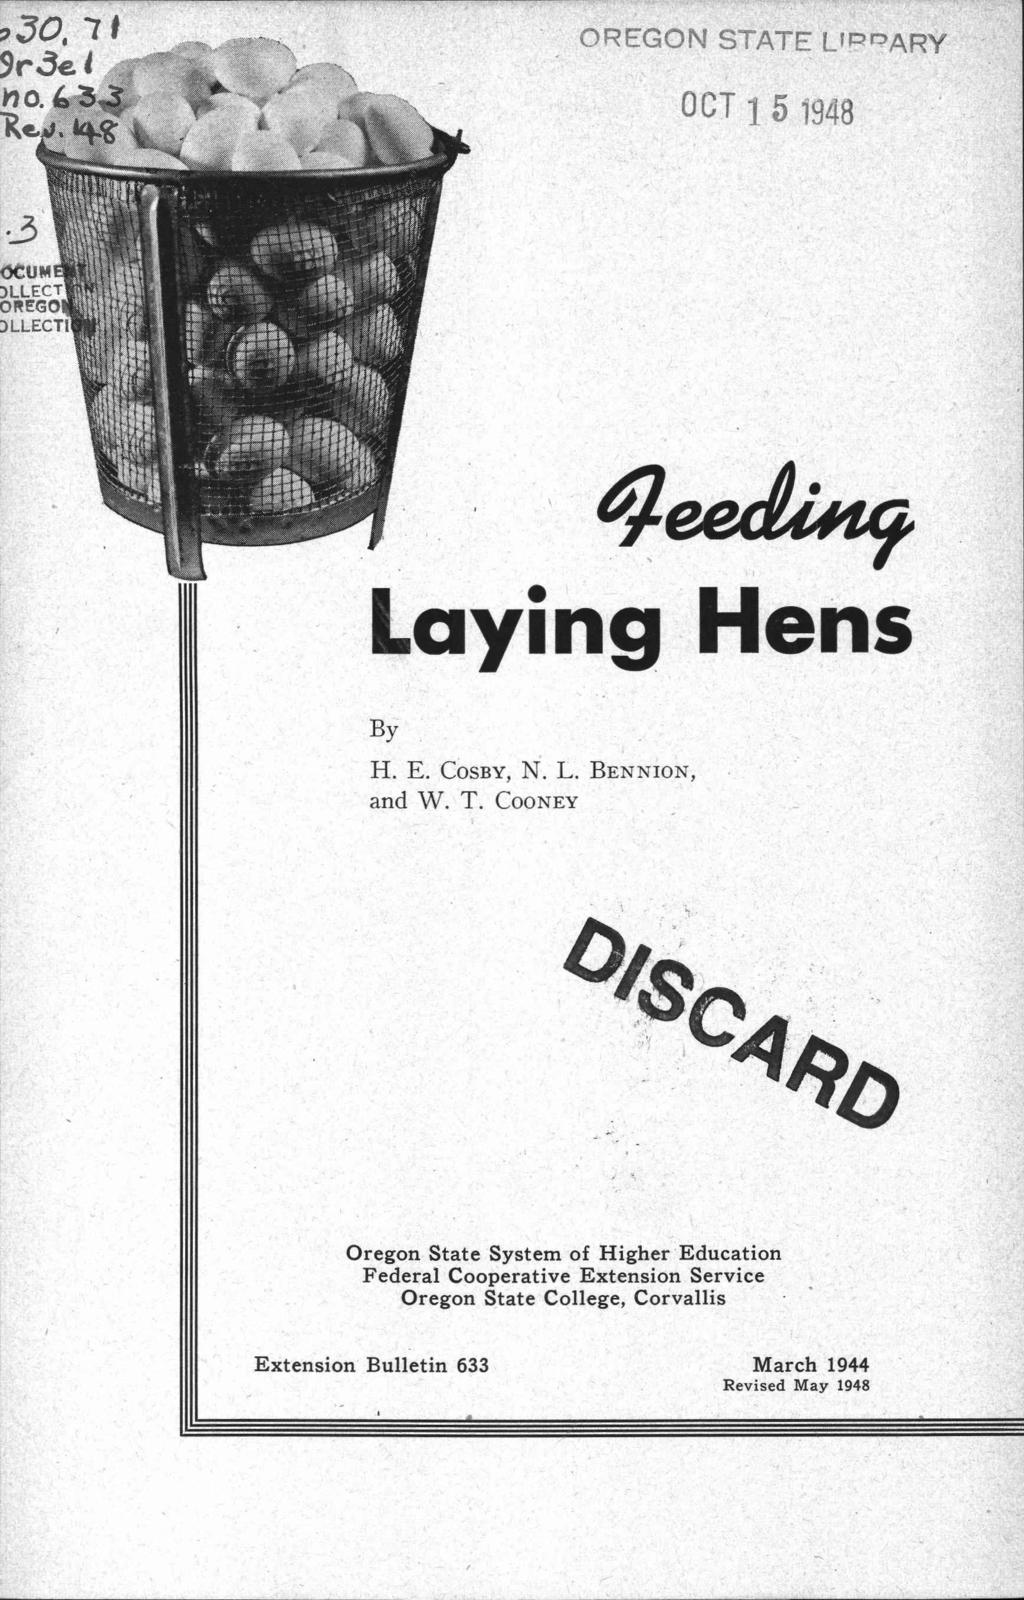 3 demi pllect OREGO DLLECTI OREGON STATE LIPRARY OCT 1 5 1948 4 Laying Hens By H. E. COSBY, N. L. BENNION, and W. T.